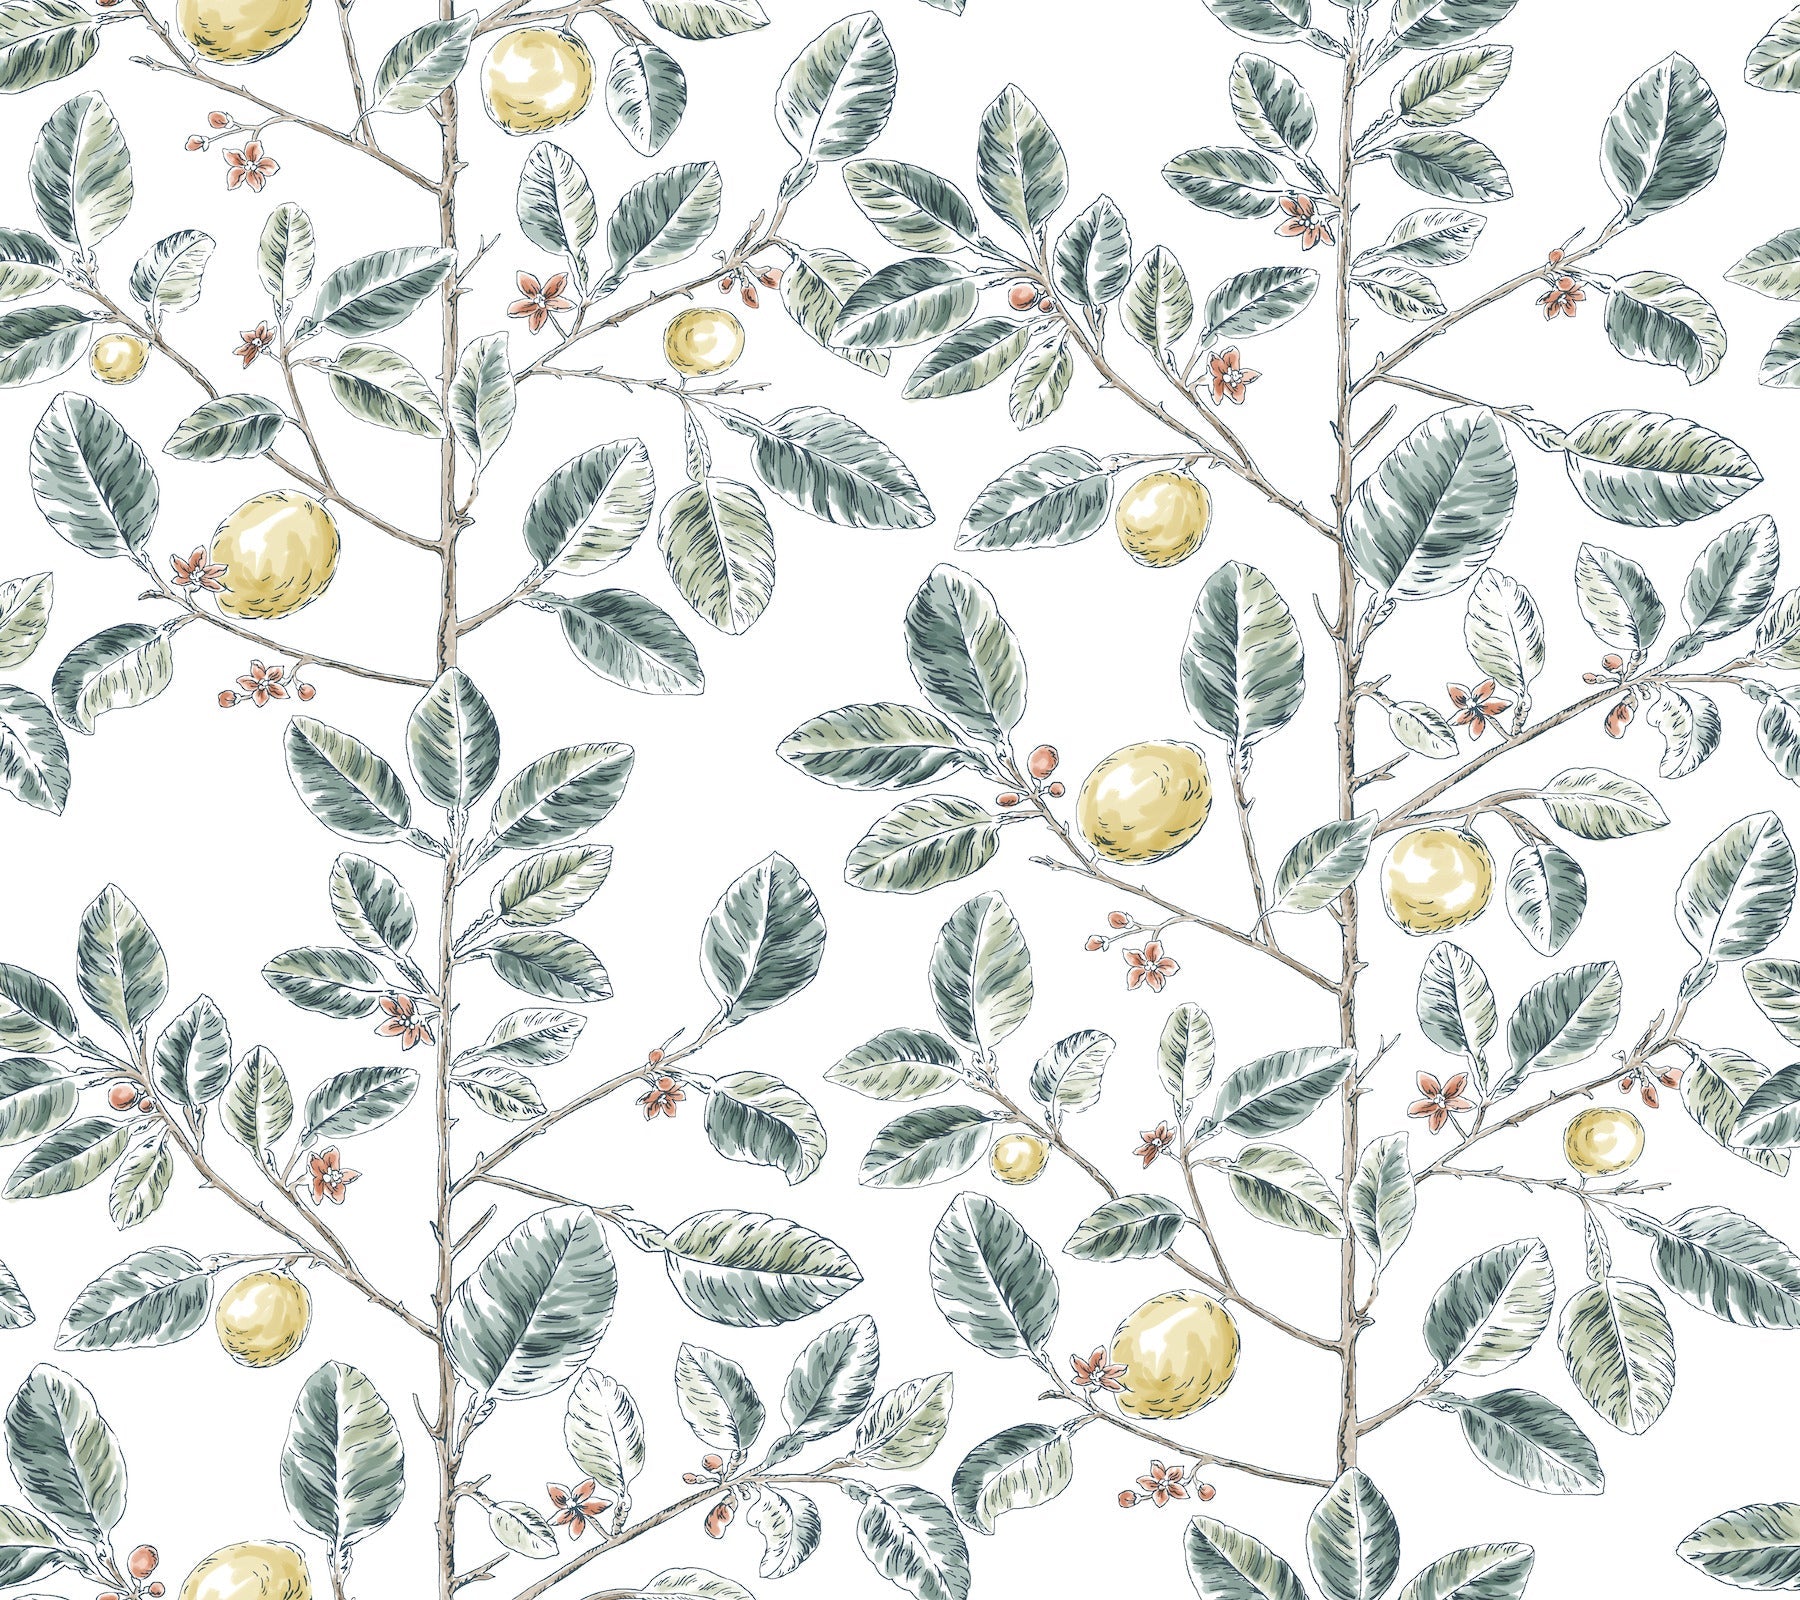 Limoncello Toile Wallpaper Wallpaper York Wallcoverings Double Roll Forest 